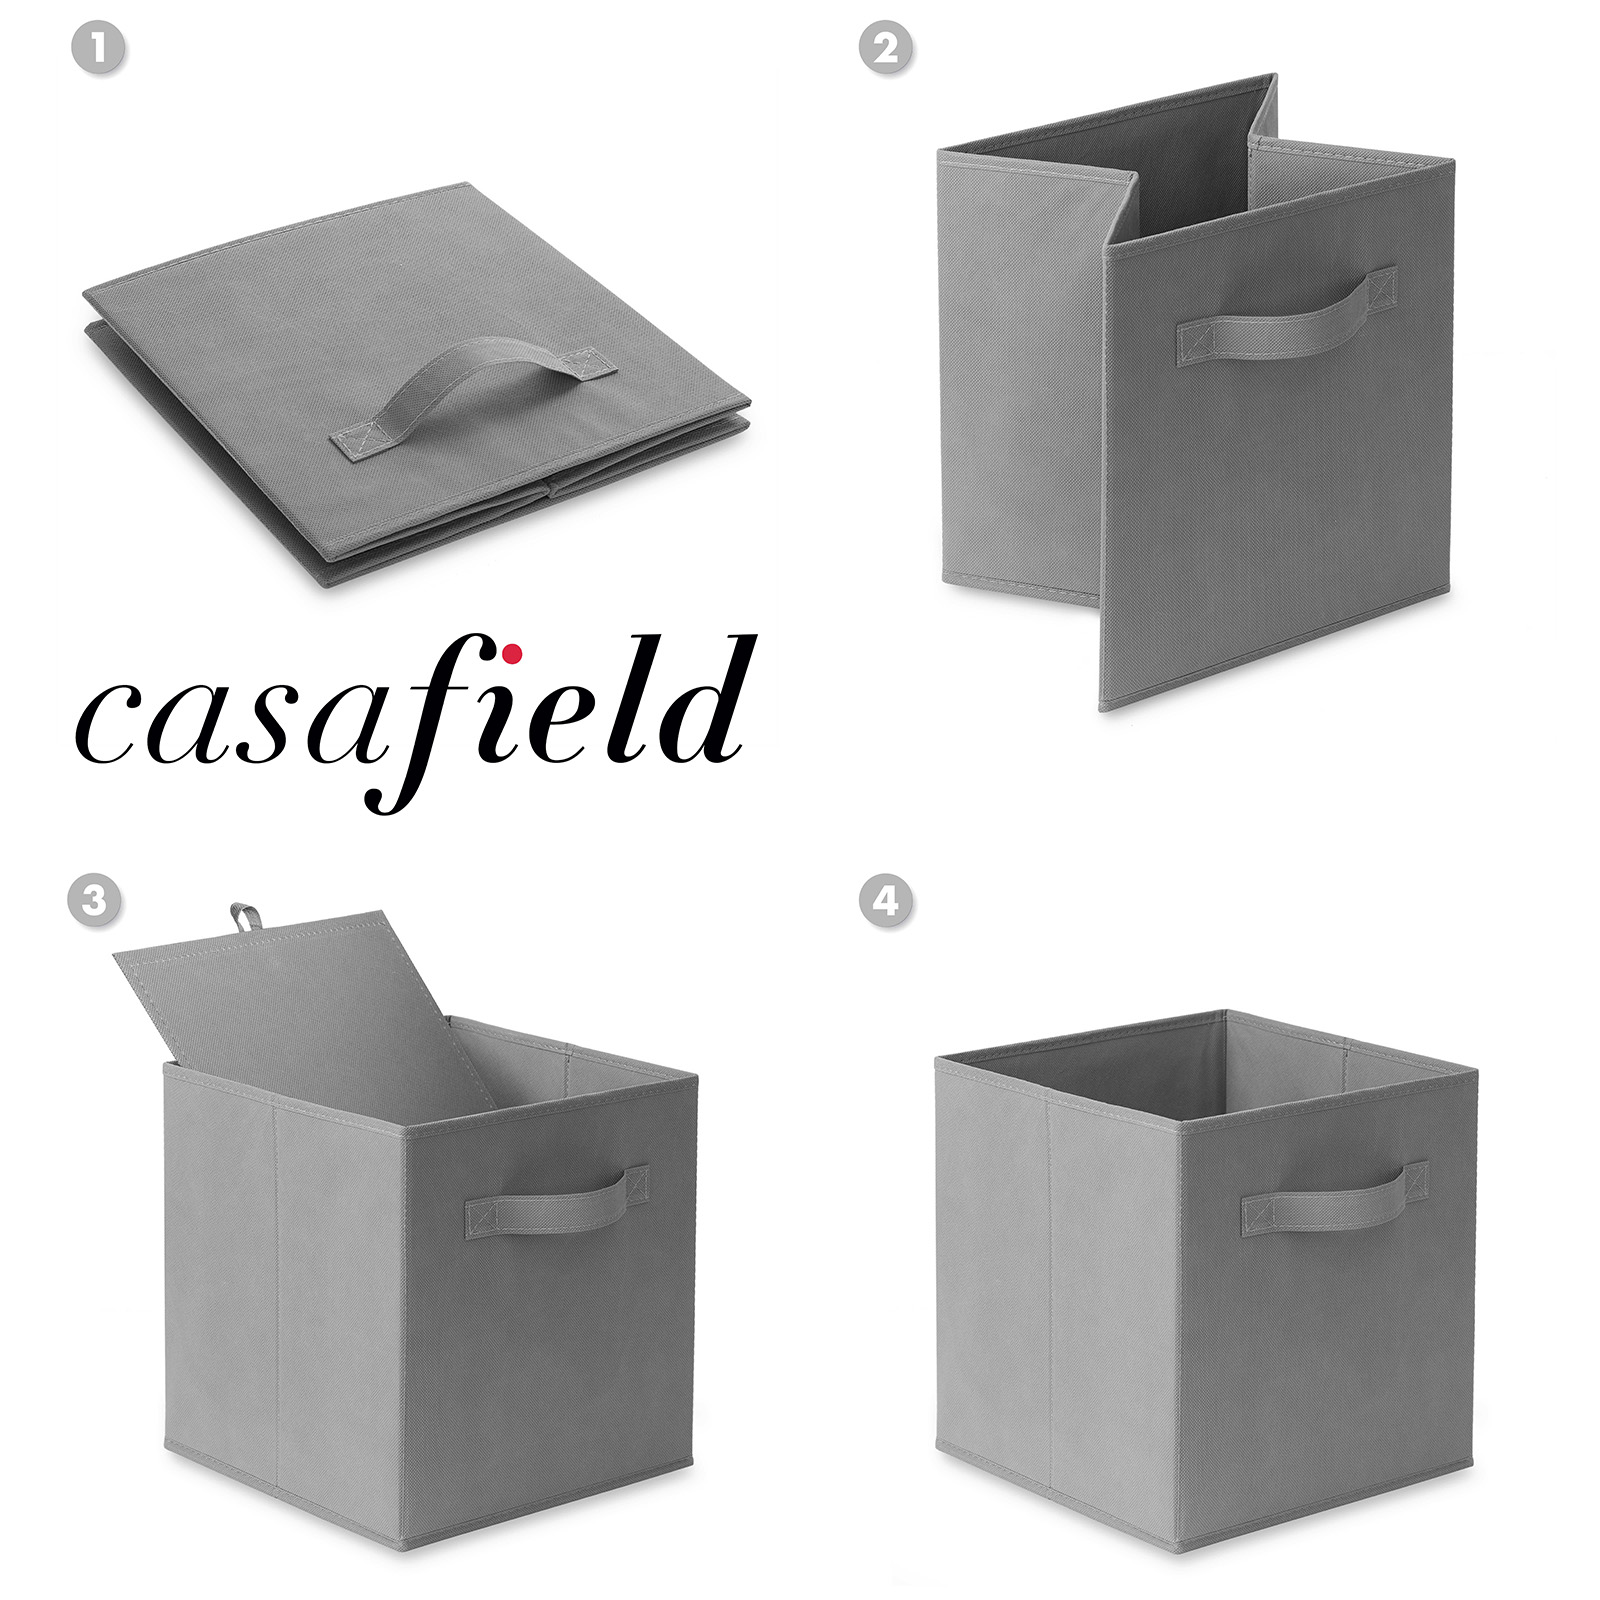 Casafield Set of 6 Collapsible Fabric Cube Storage Bins - 11" Foldable Cloth Baskets for Shelves, Cubby Organizers & More - image 2 of 7